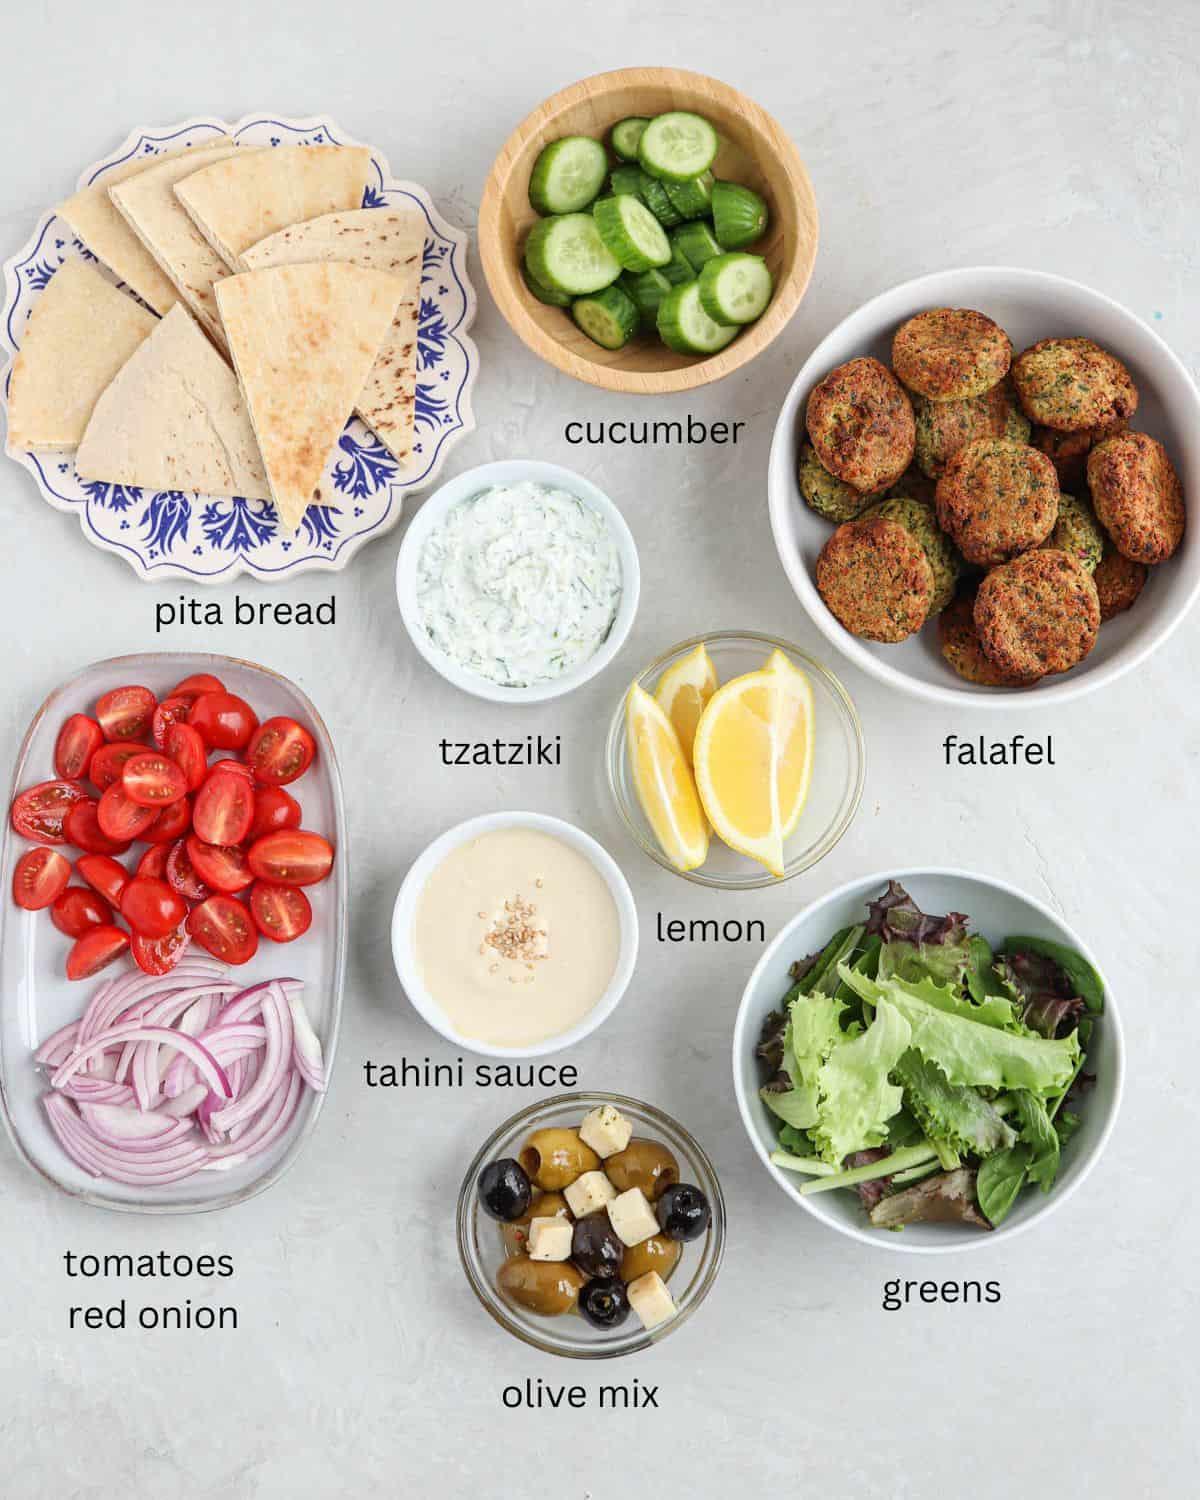 ingredients for making falafel platter in bowls and containers on gray surface with captions.